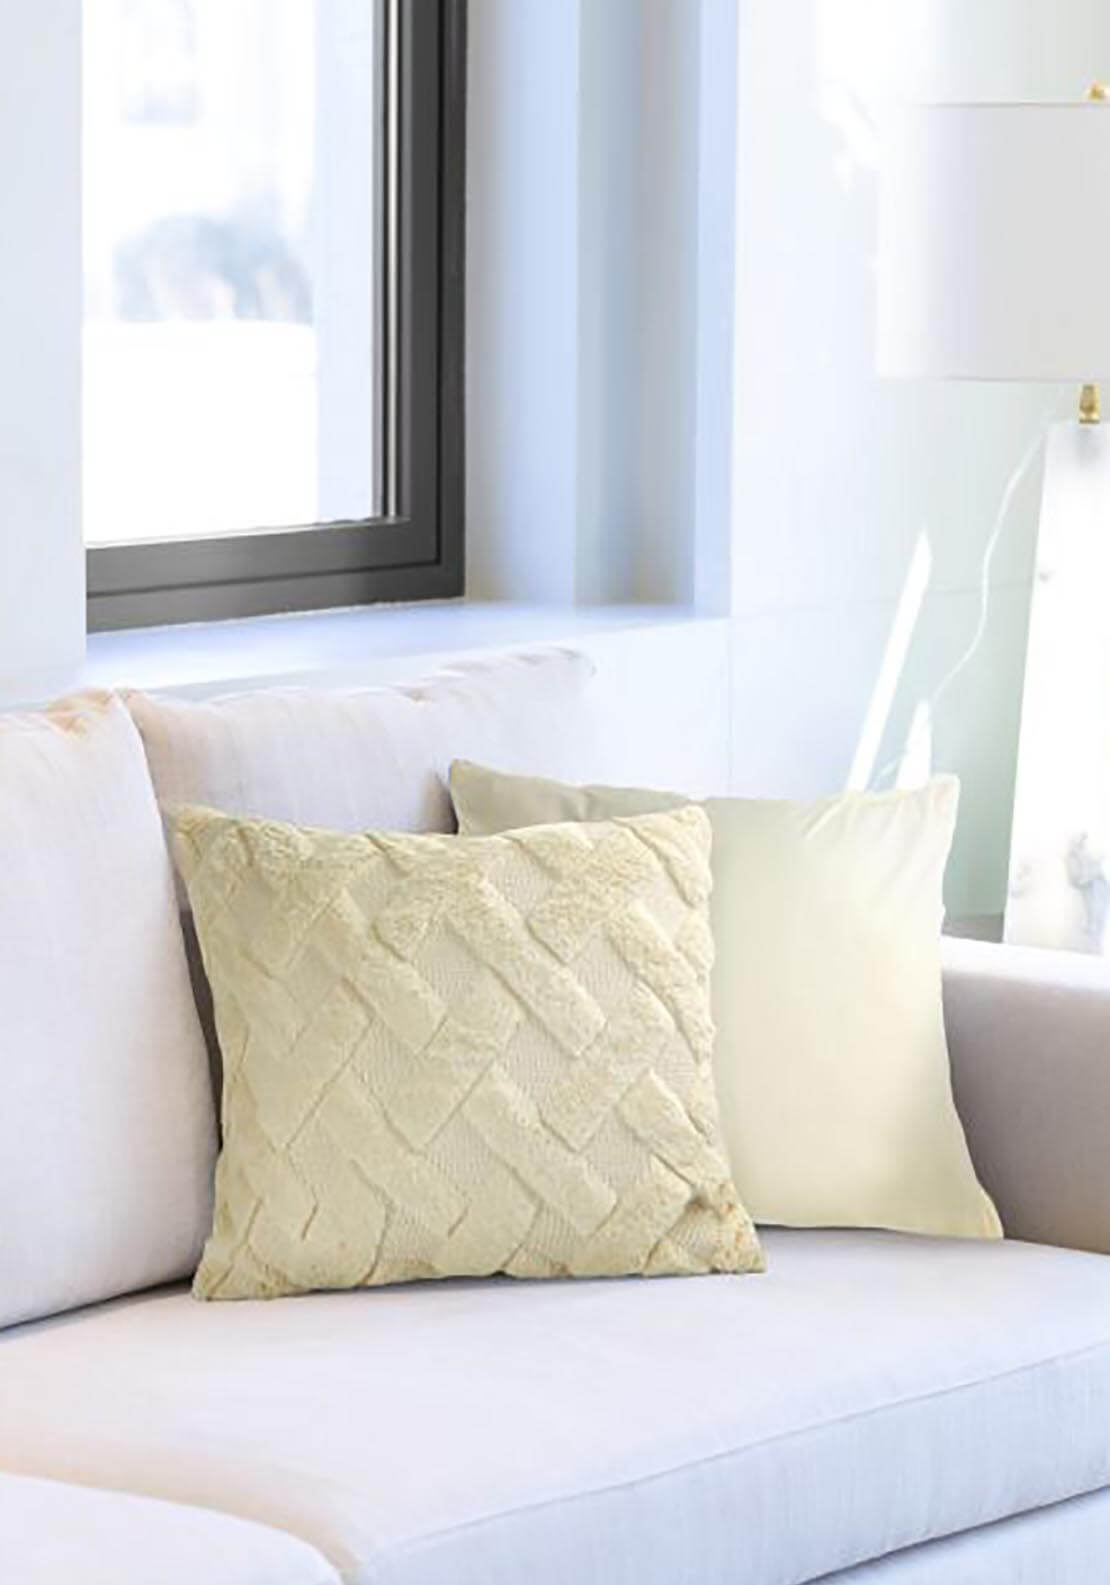 The Home Collection Nyla Cushion - Cream 1 Shaws Department Stores